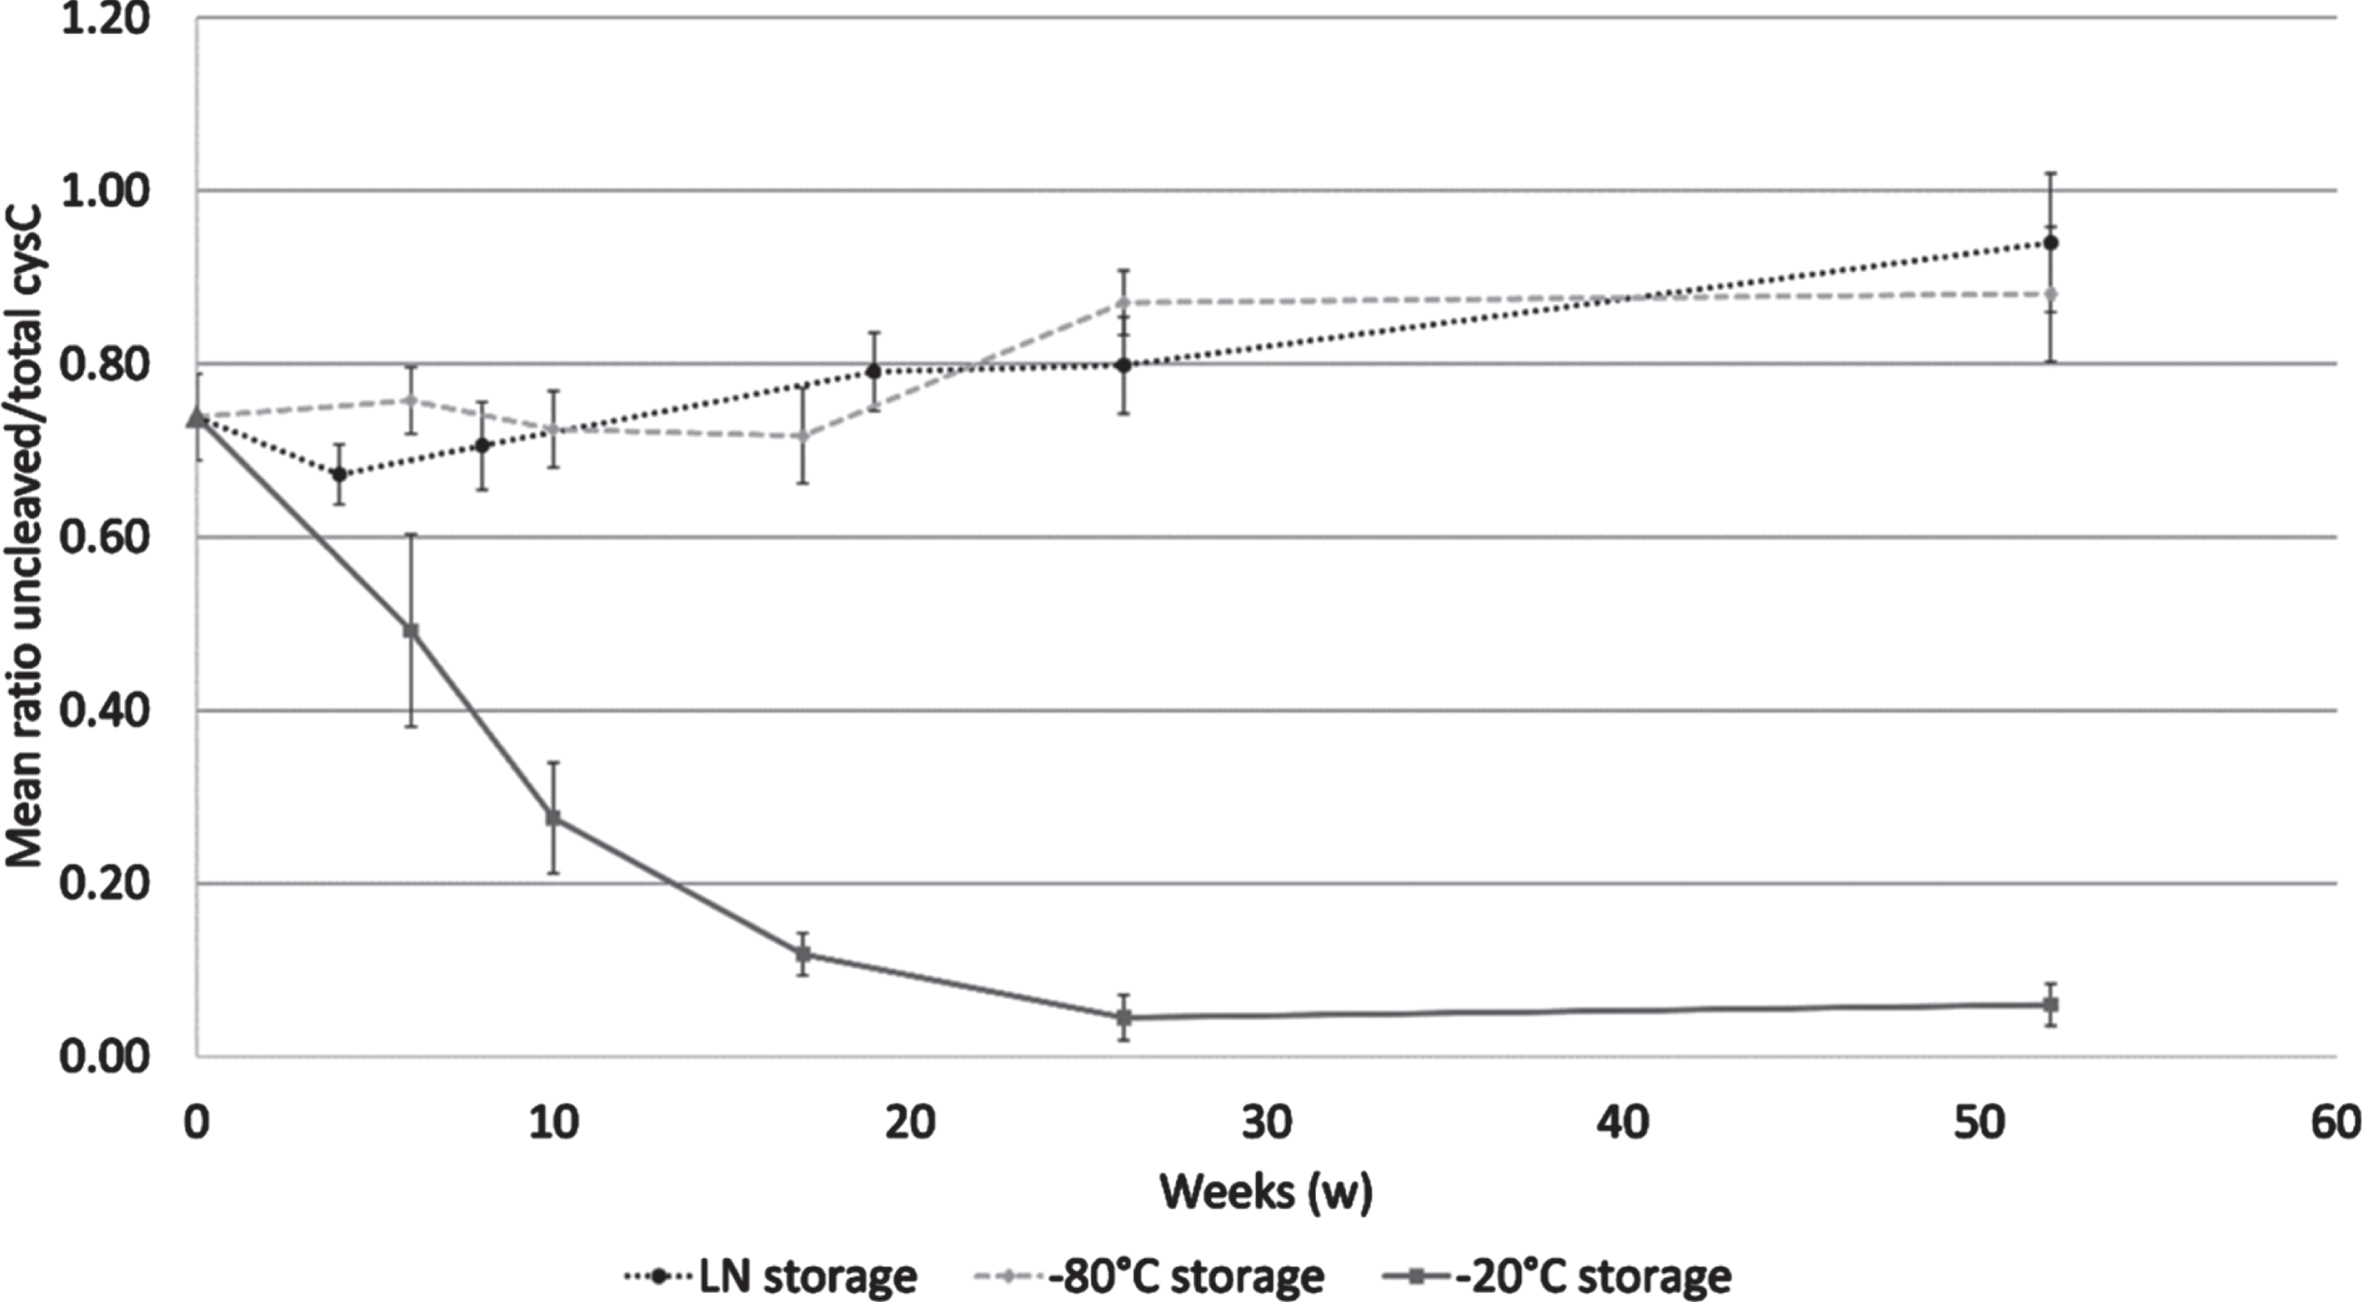 Cystatin C ratio in a mid-term storage stability study. Samples were analyzed at 6, 10, 17, 26, and 52 weeks when stored at –20°C (solid line) and at –80°C (dashed line); and at 4, 8, 19, 26, and 52 weeks when stored in LN (dotted line). The reference sample is shown by a triangle dot. Error bars are one standard deviation.